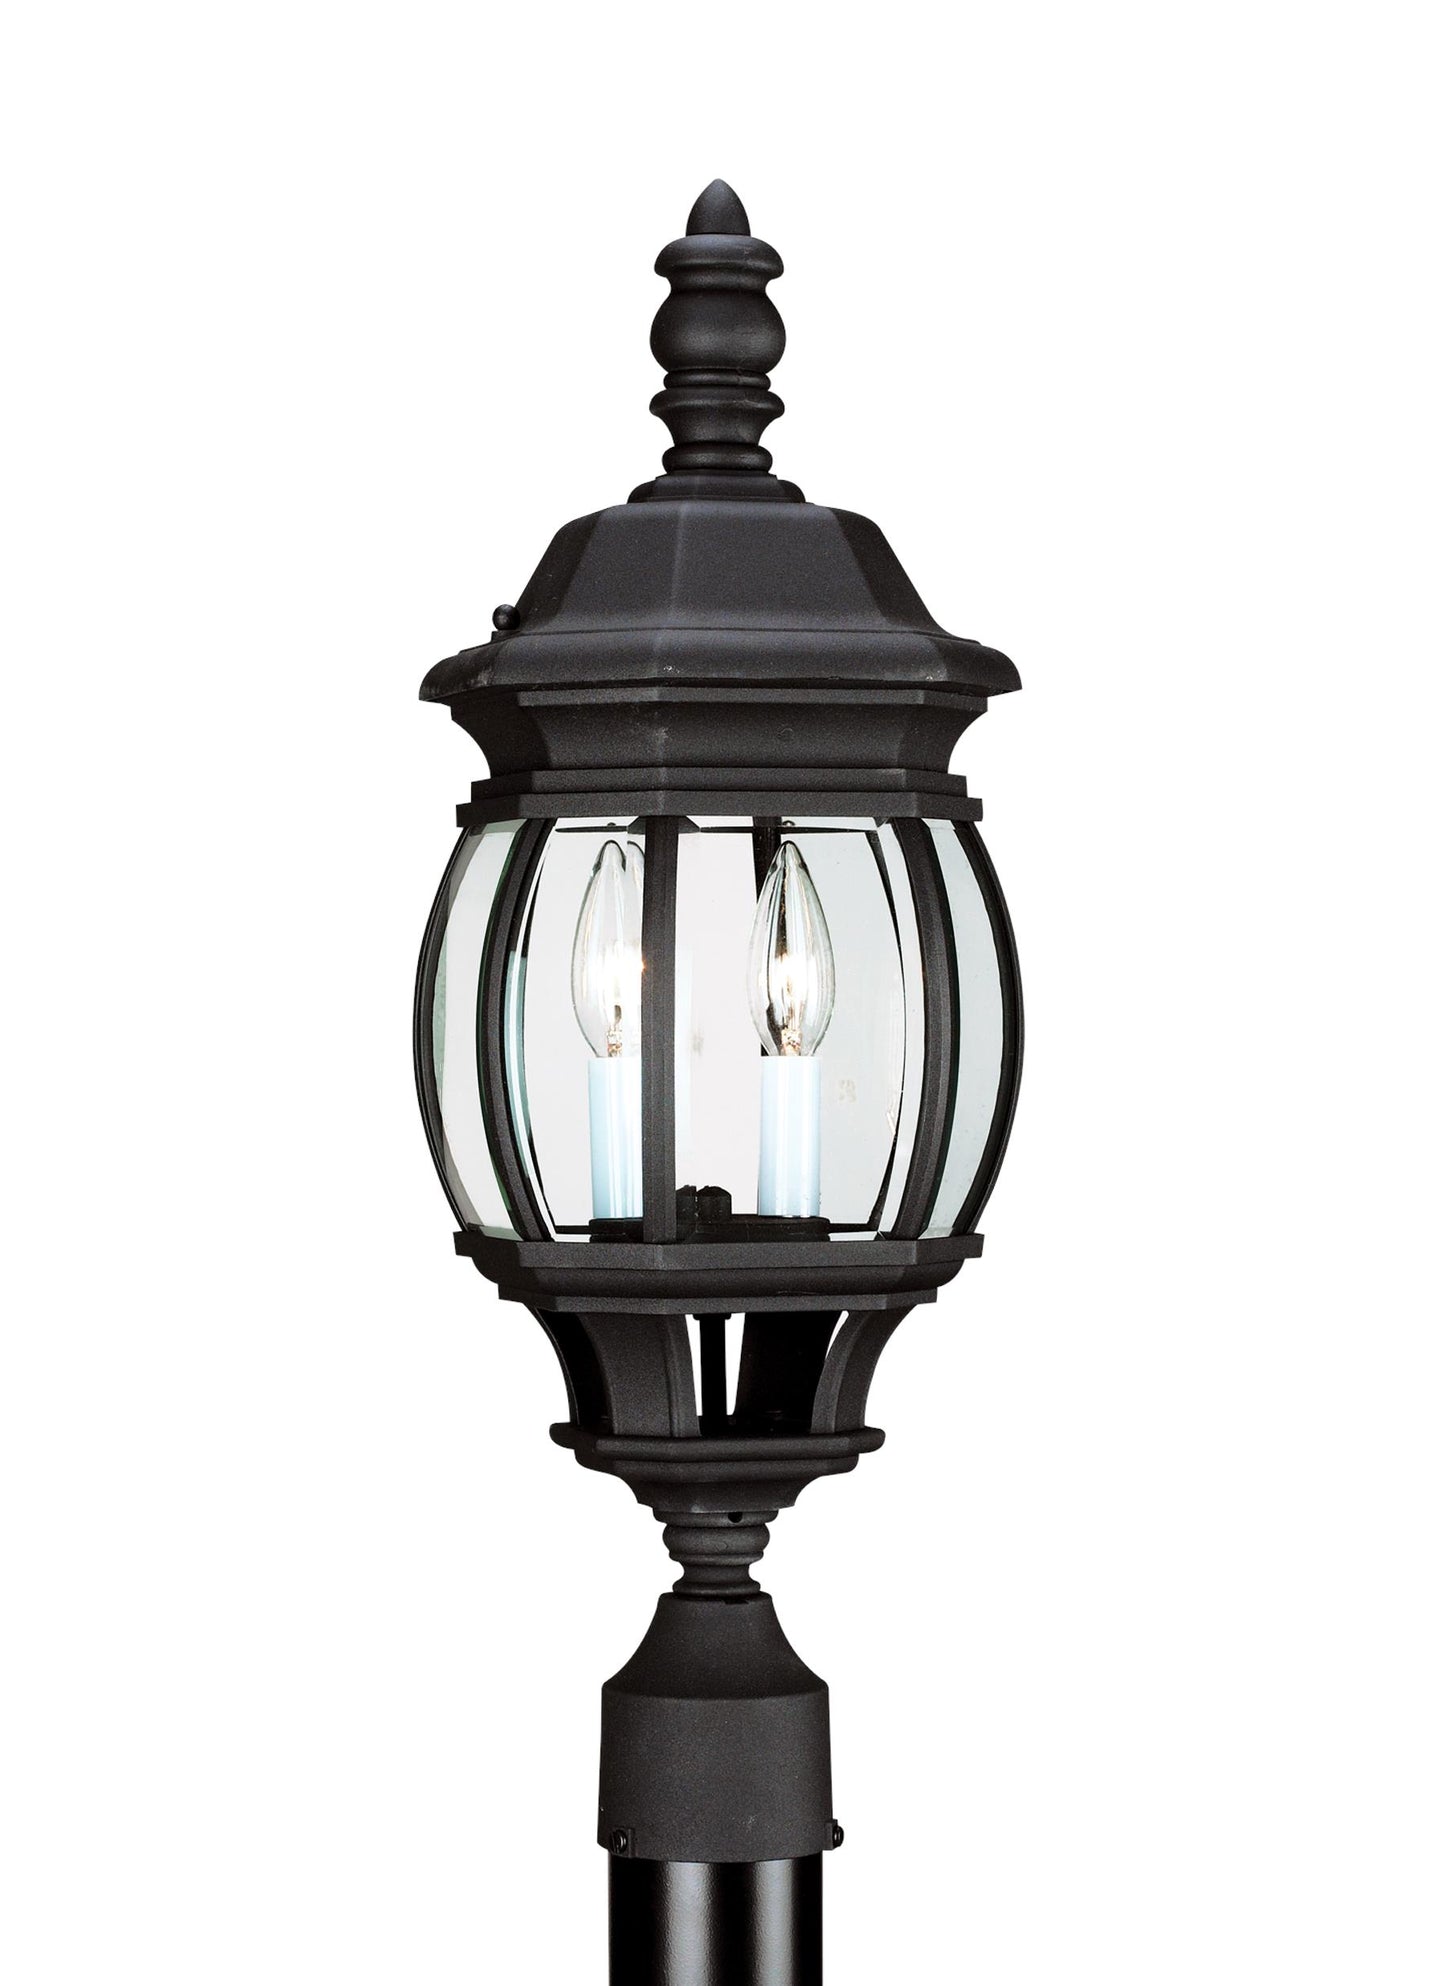 Wynfield traditional 2-light outdoor exterior post lantern in black finish with clear beveled glass panels